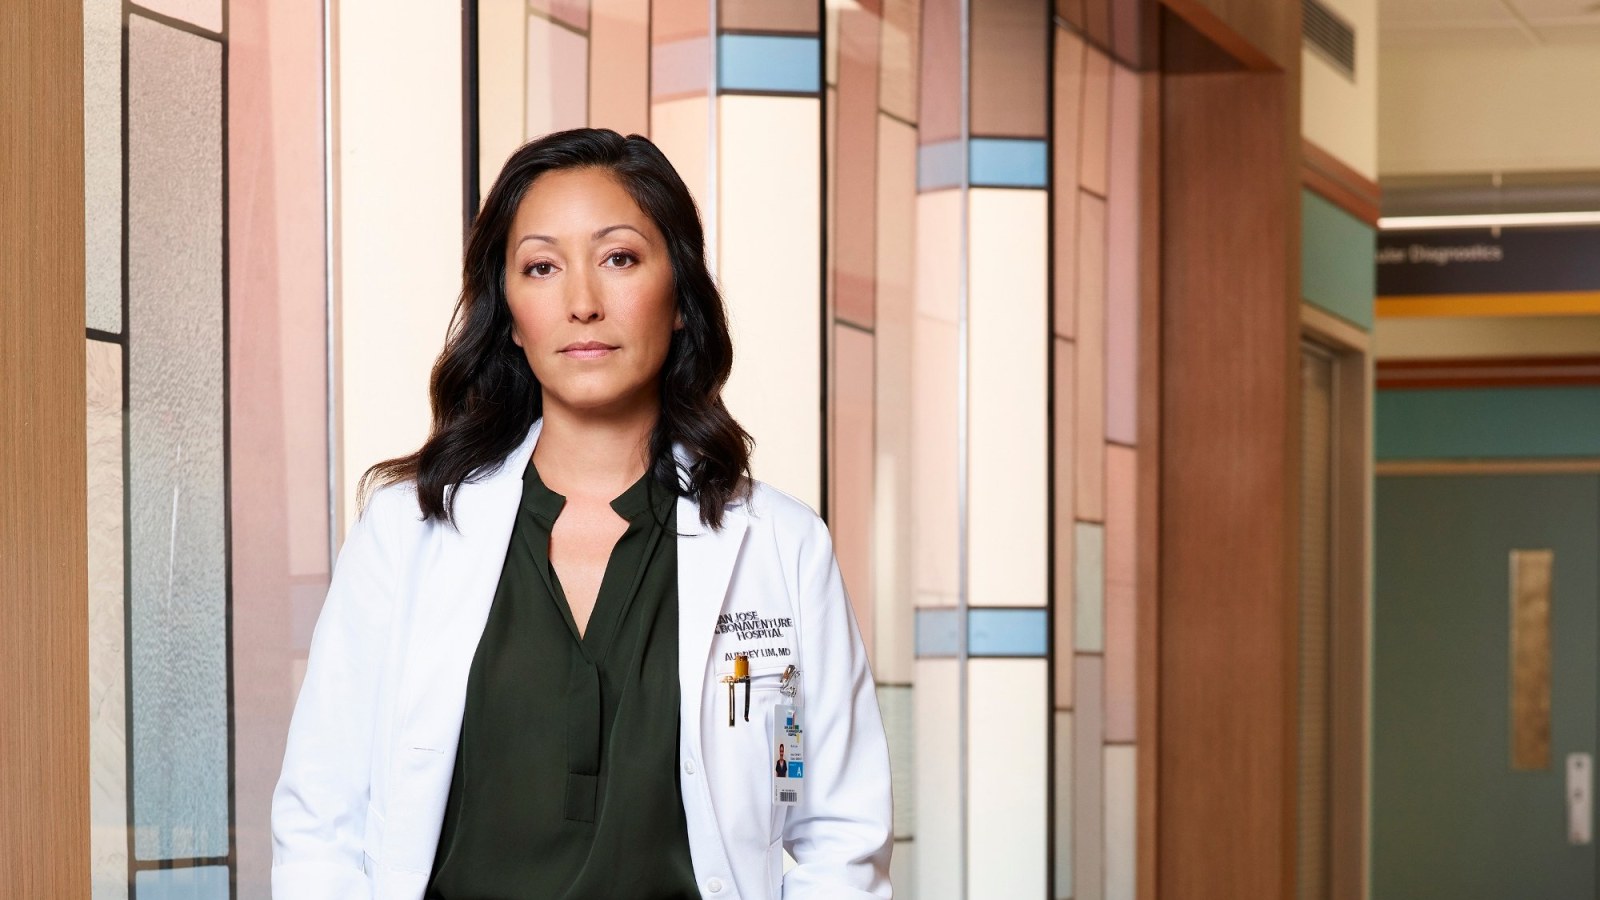 Dr. Audrey Lim: The empowered doctor